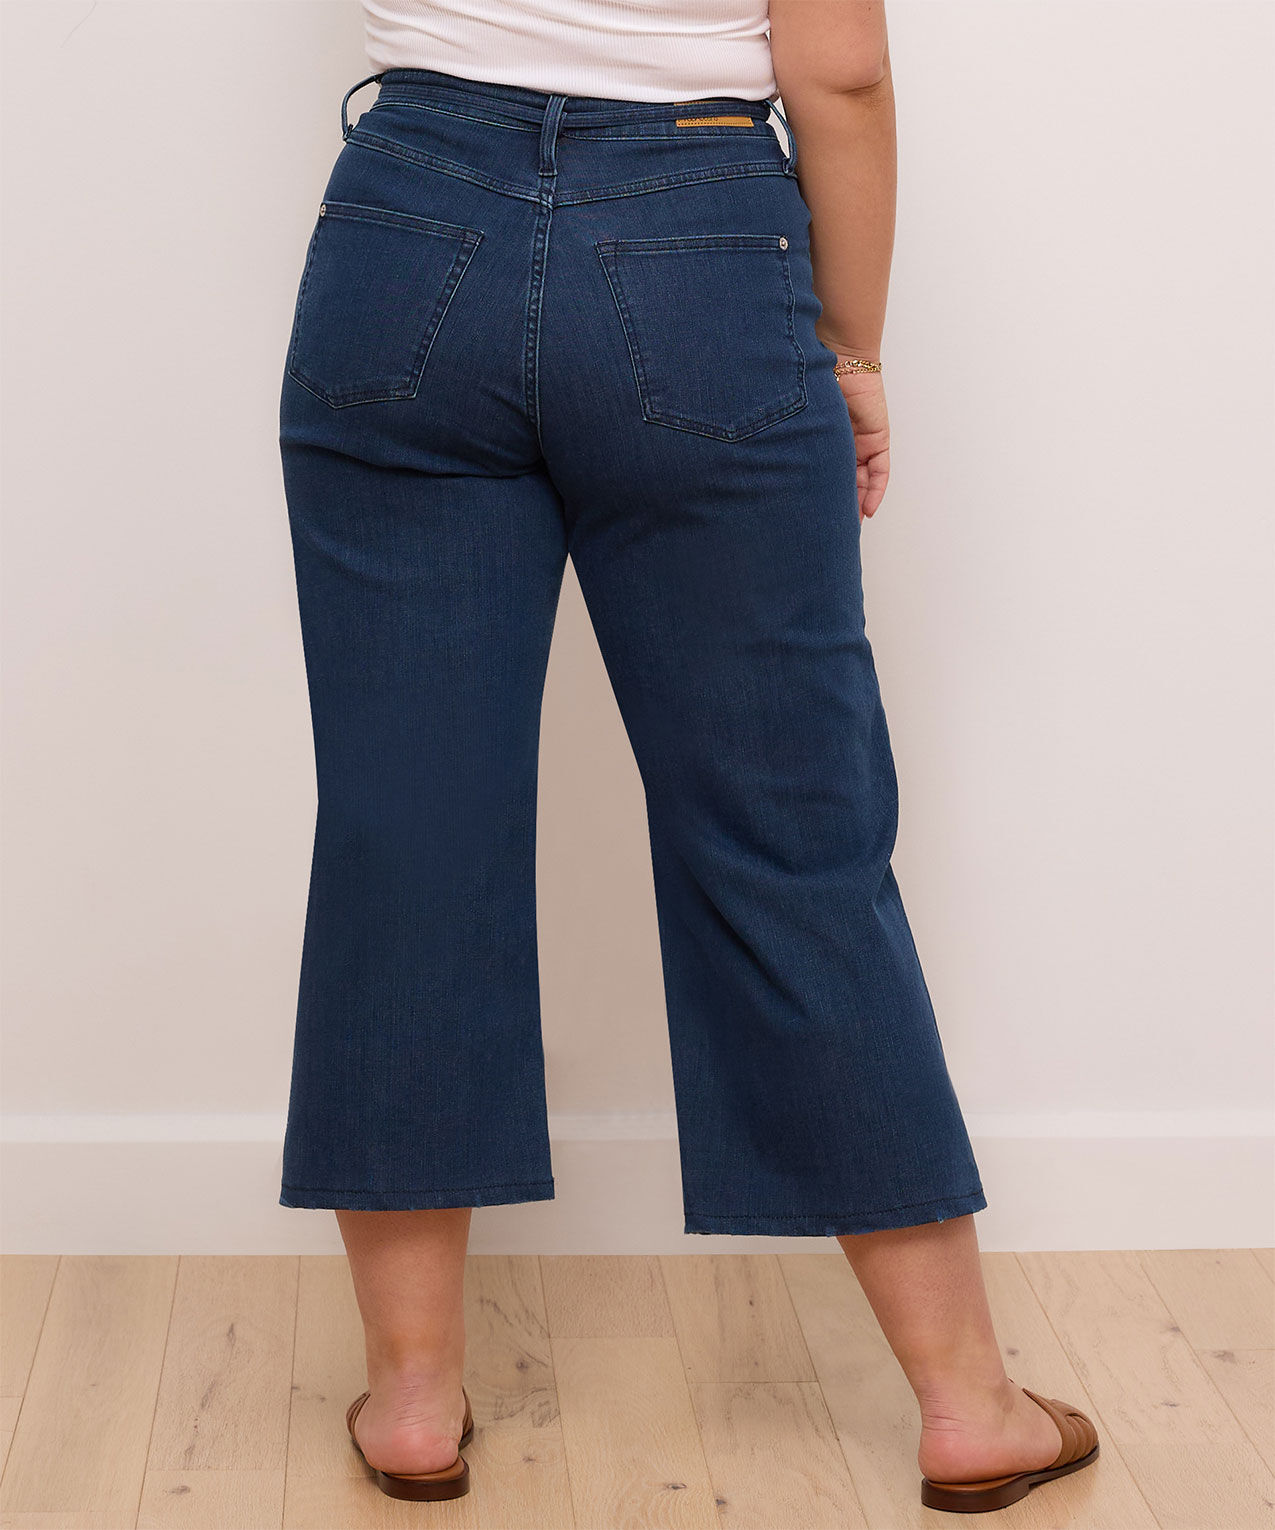 Yoga Jeans Lilly Fashion Wide High Rise